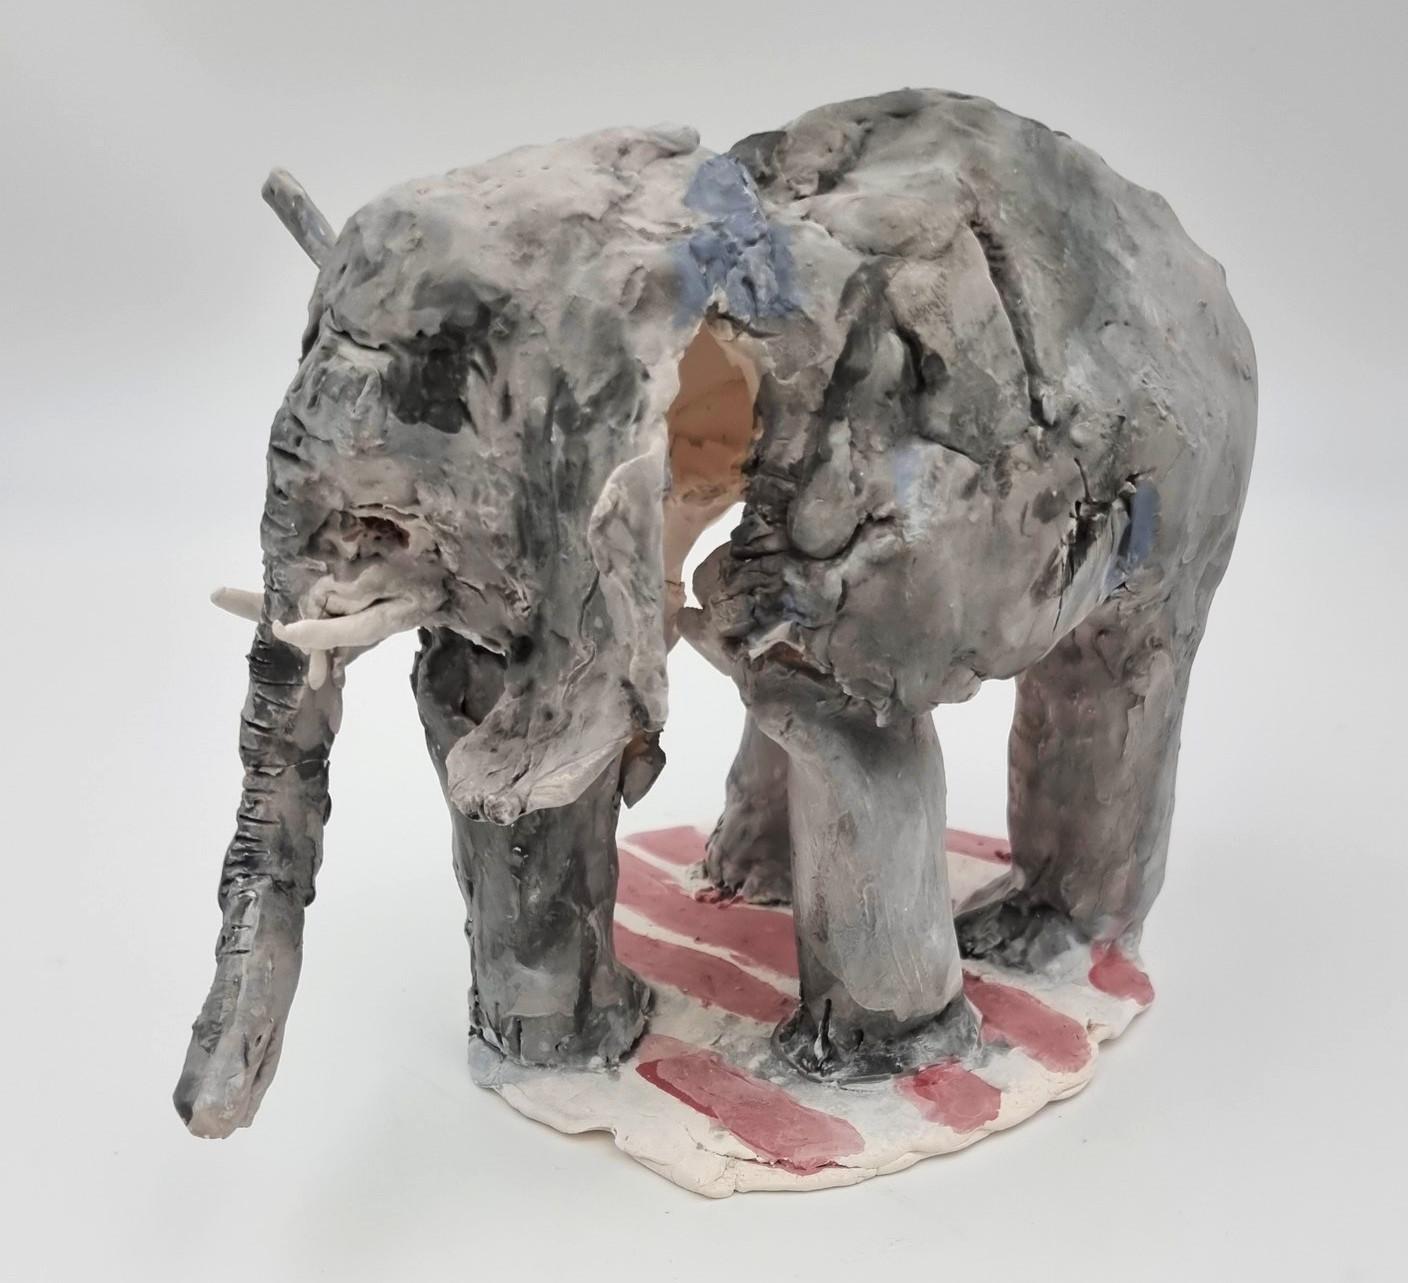 Ann Rothman
Elephant (Circus, Whimsical, Viola Frey, Delicate, Playful, Fun, Cirque du Soleil, The Ringling Bros., Barnum & Bailey)
2021
Porcelain, Low Fire Glazes, Crayons, Watercolors
Fired Cone 06, 04
7.25 x 5.5 x 10 inches
COA provided
Ref.: